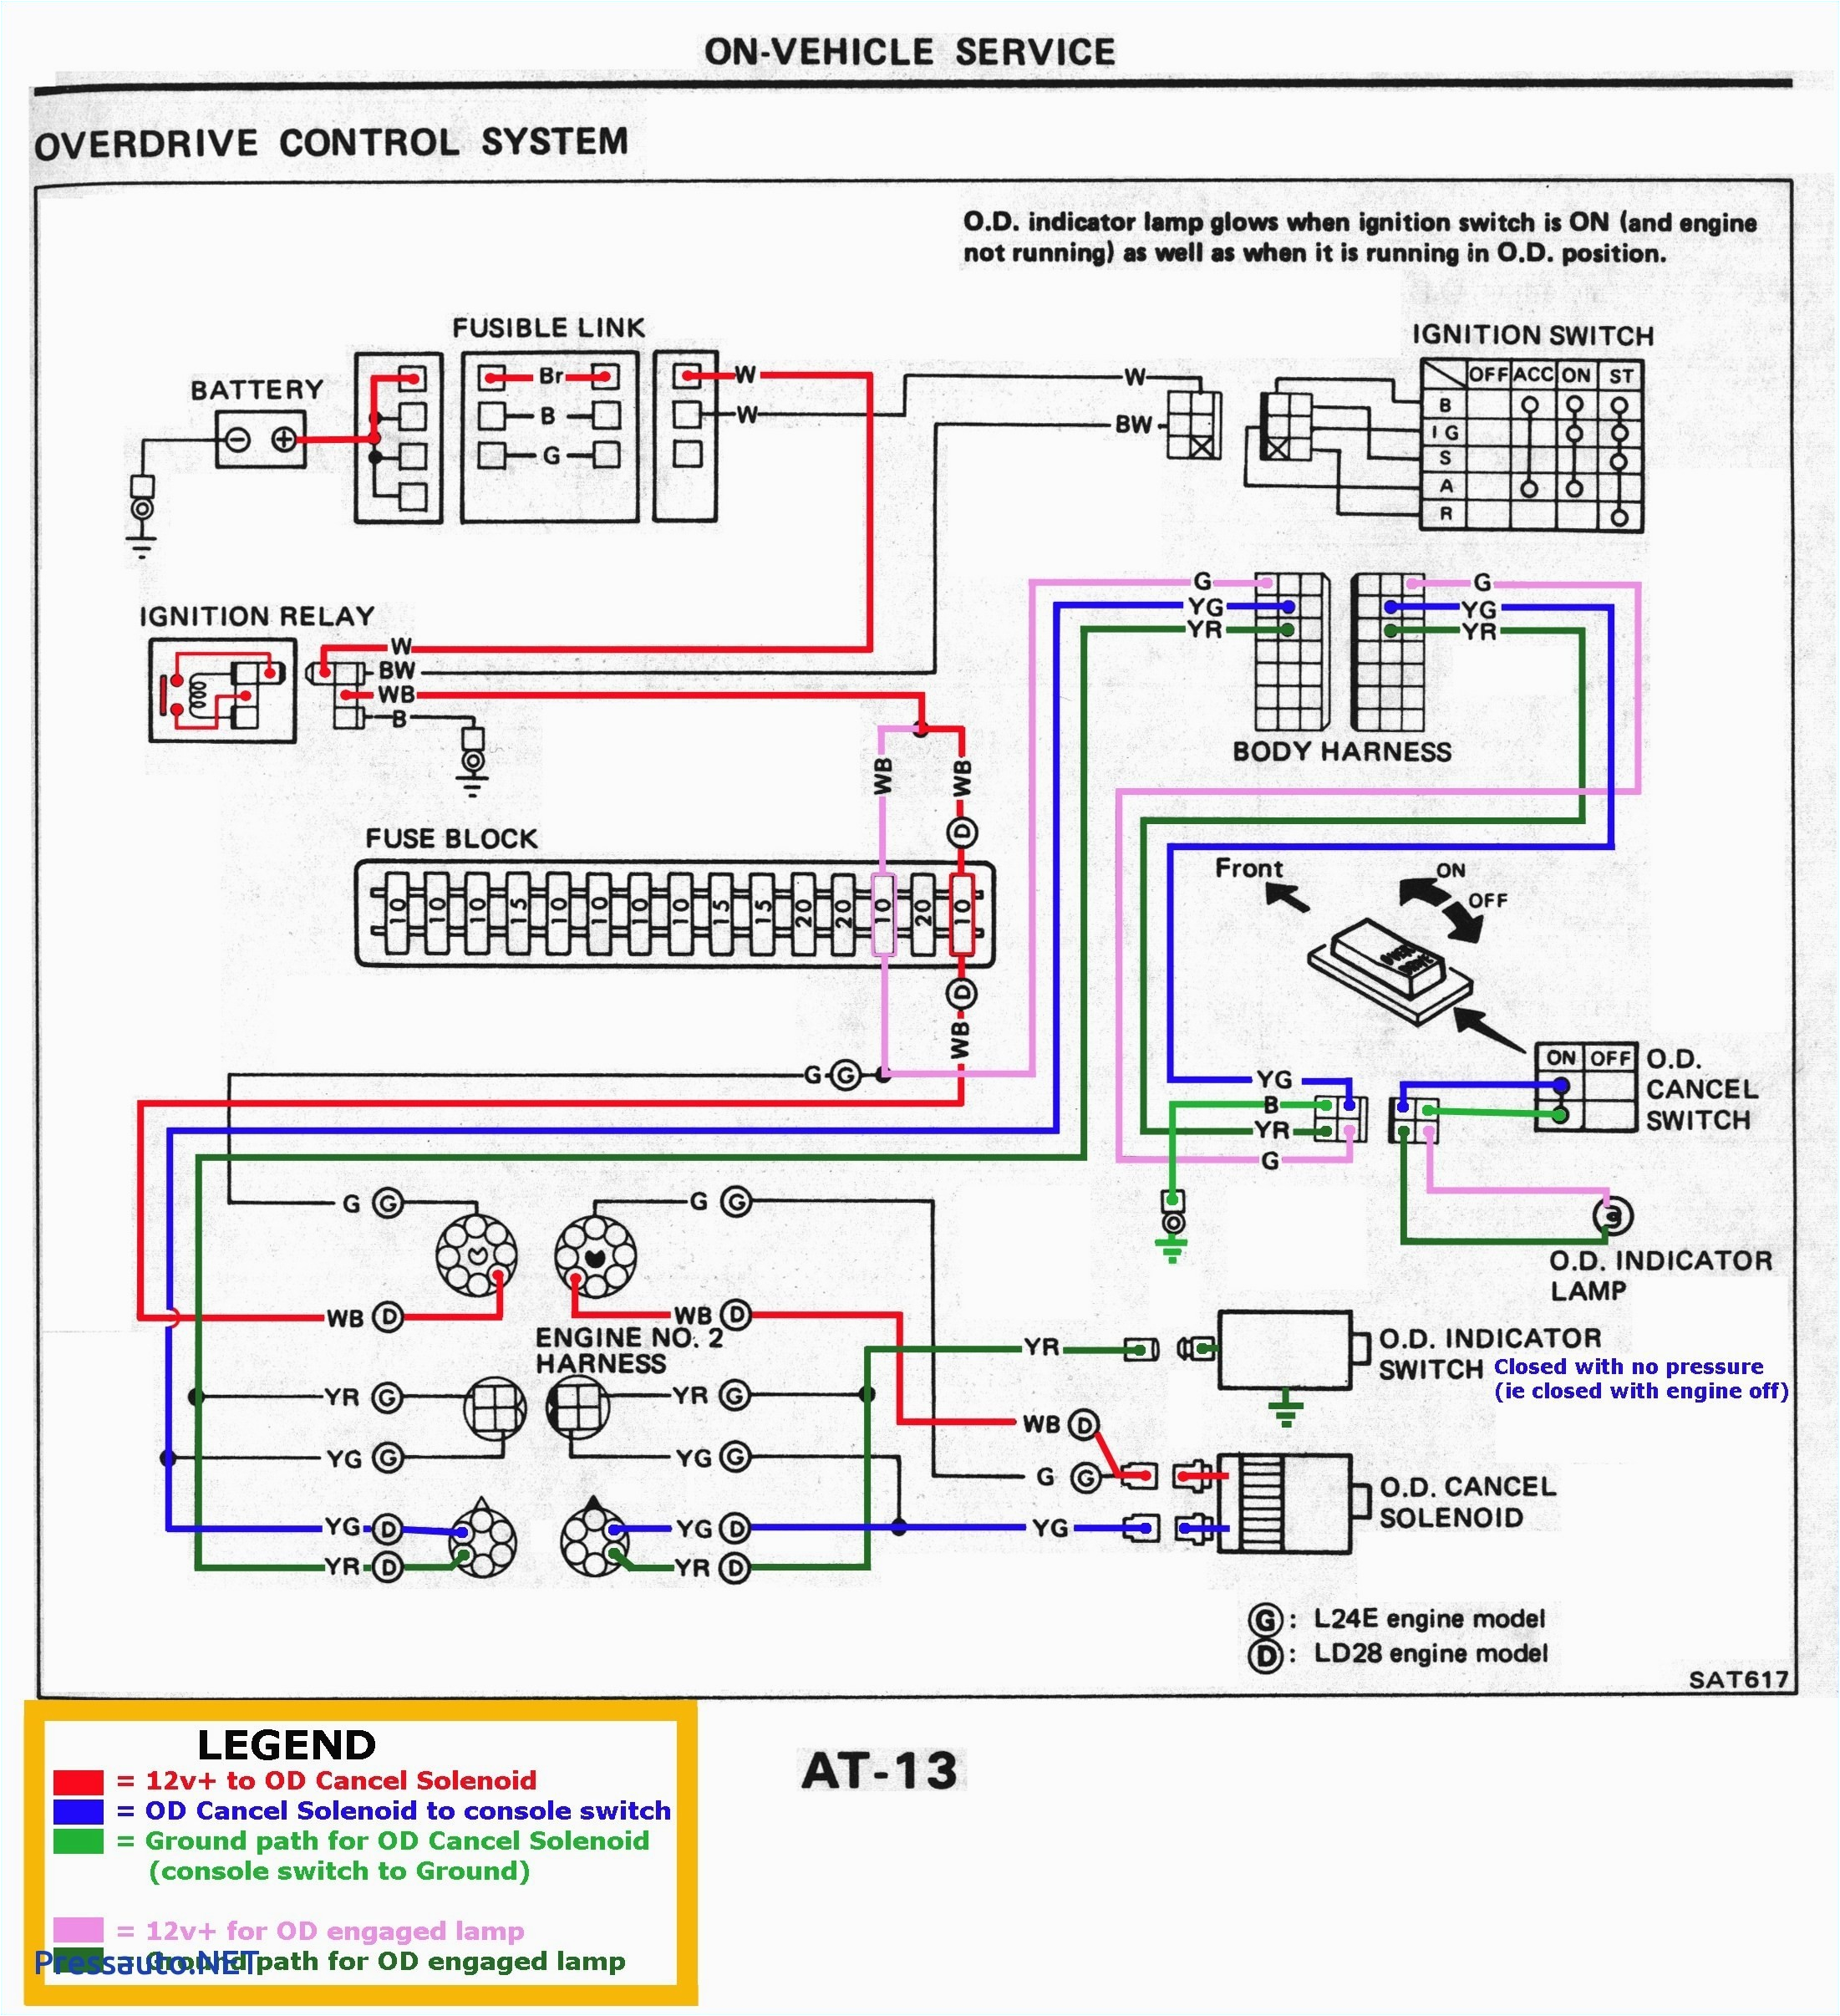 vehicle wiring diagrams uk awesome house lighting wiring diagram uk new wiring diagram auto mate